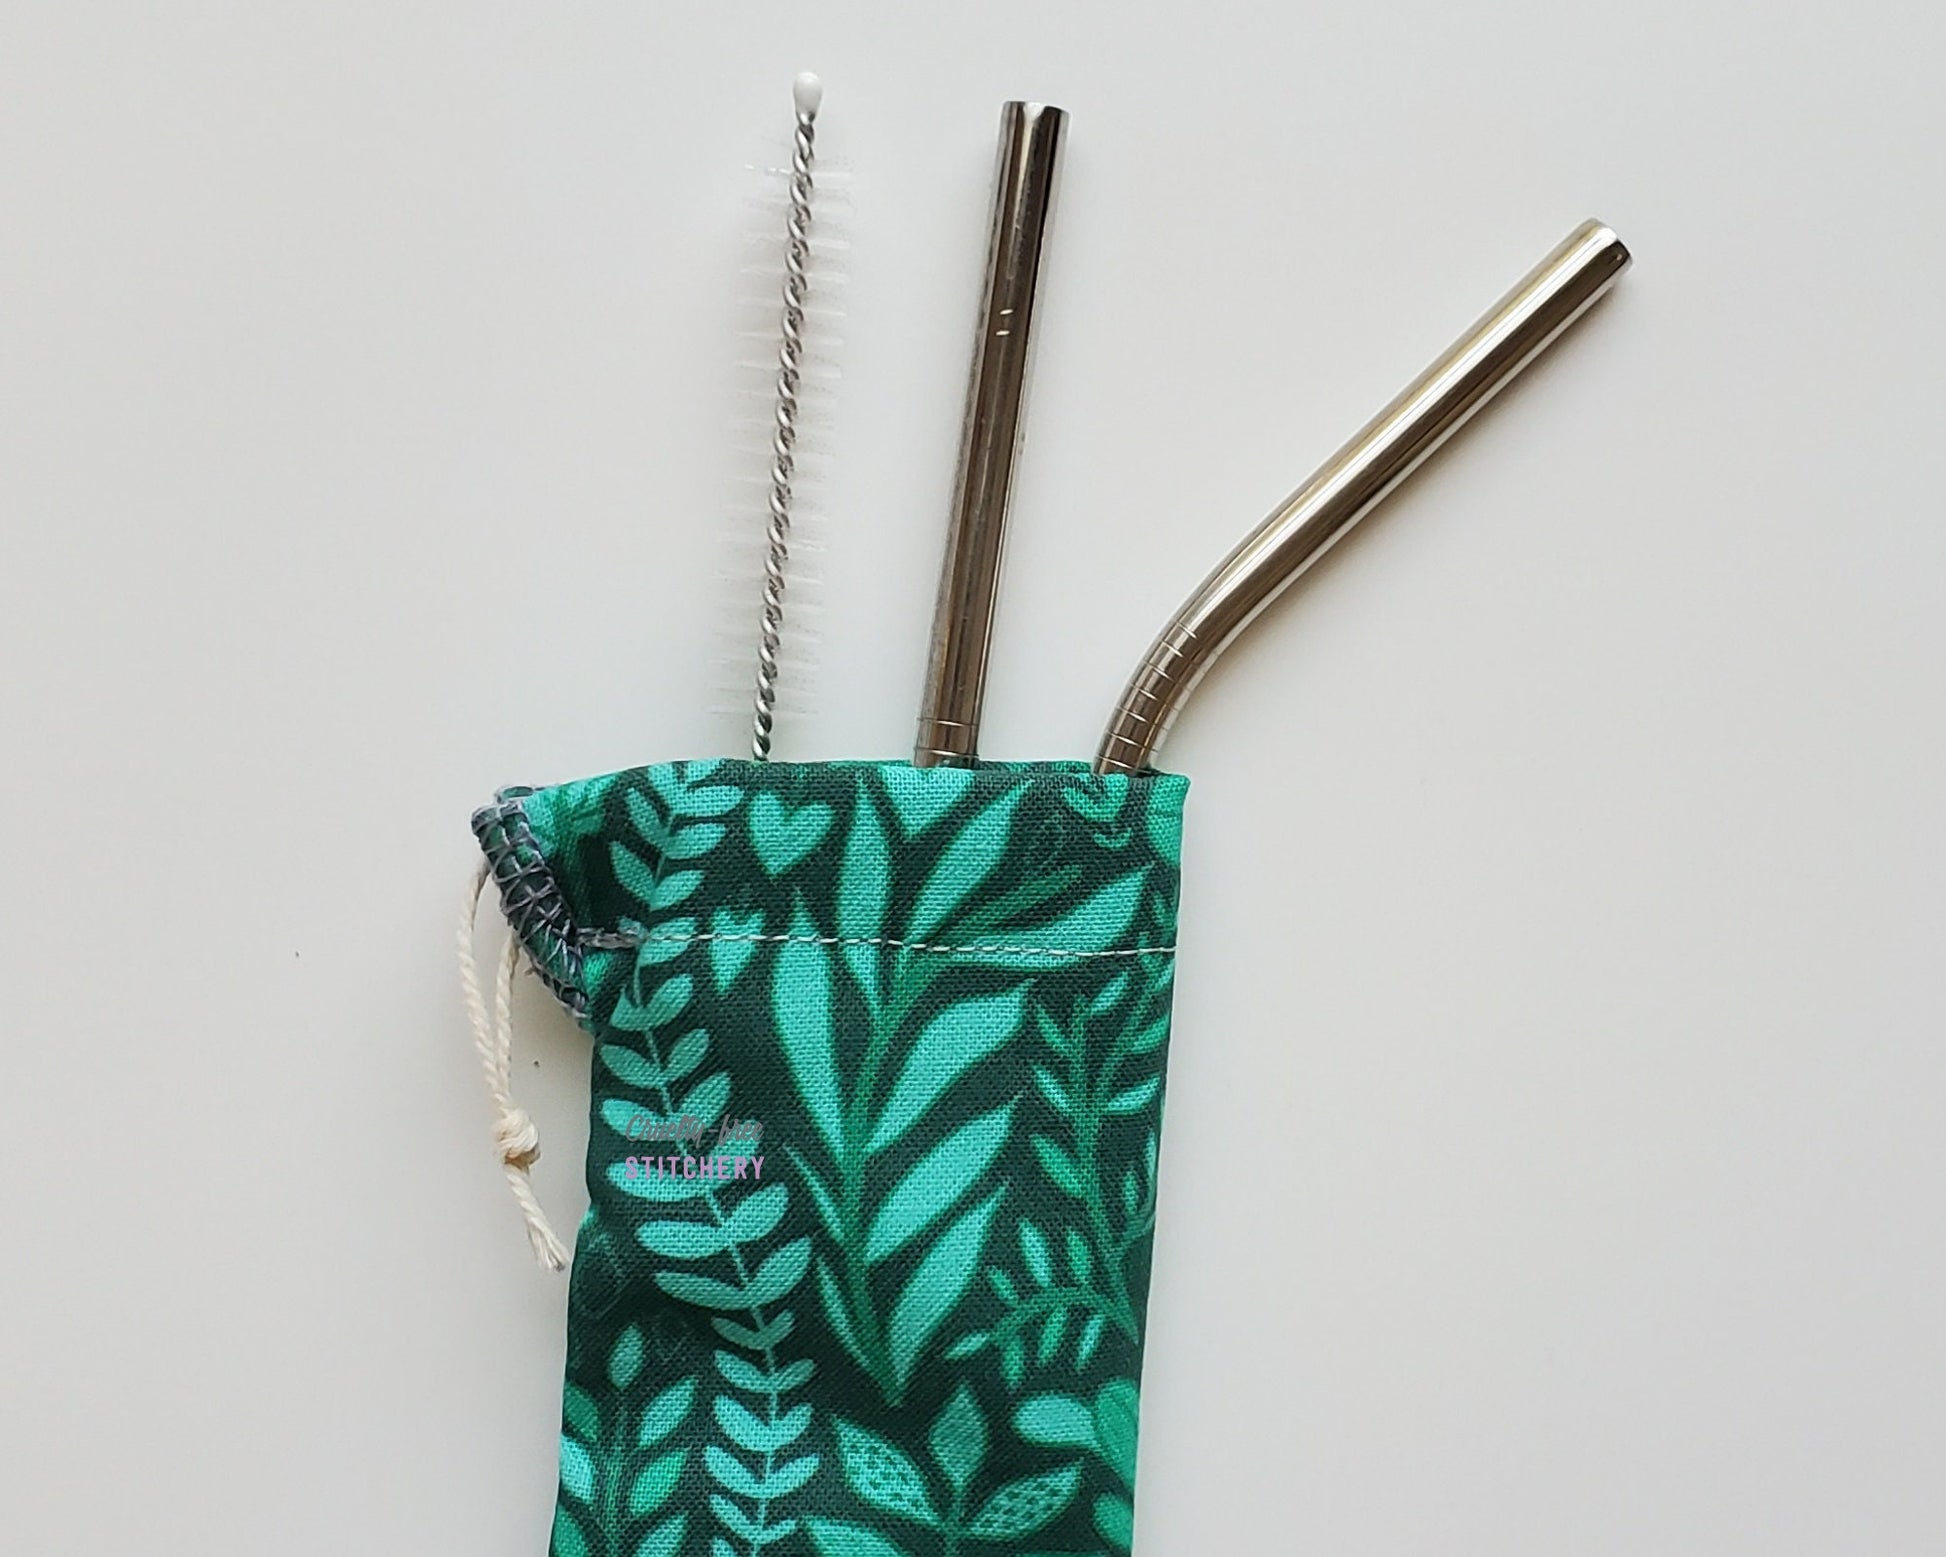 Reusable straw pouch with stainless steel straws sticking out the top. The fabric of the pouch is dark green with lighter green leaves and vines, and it has a drawstring closure.